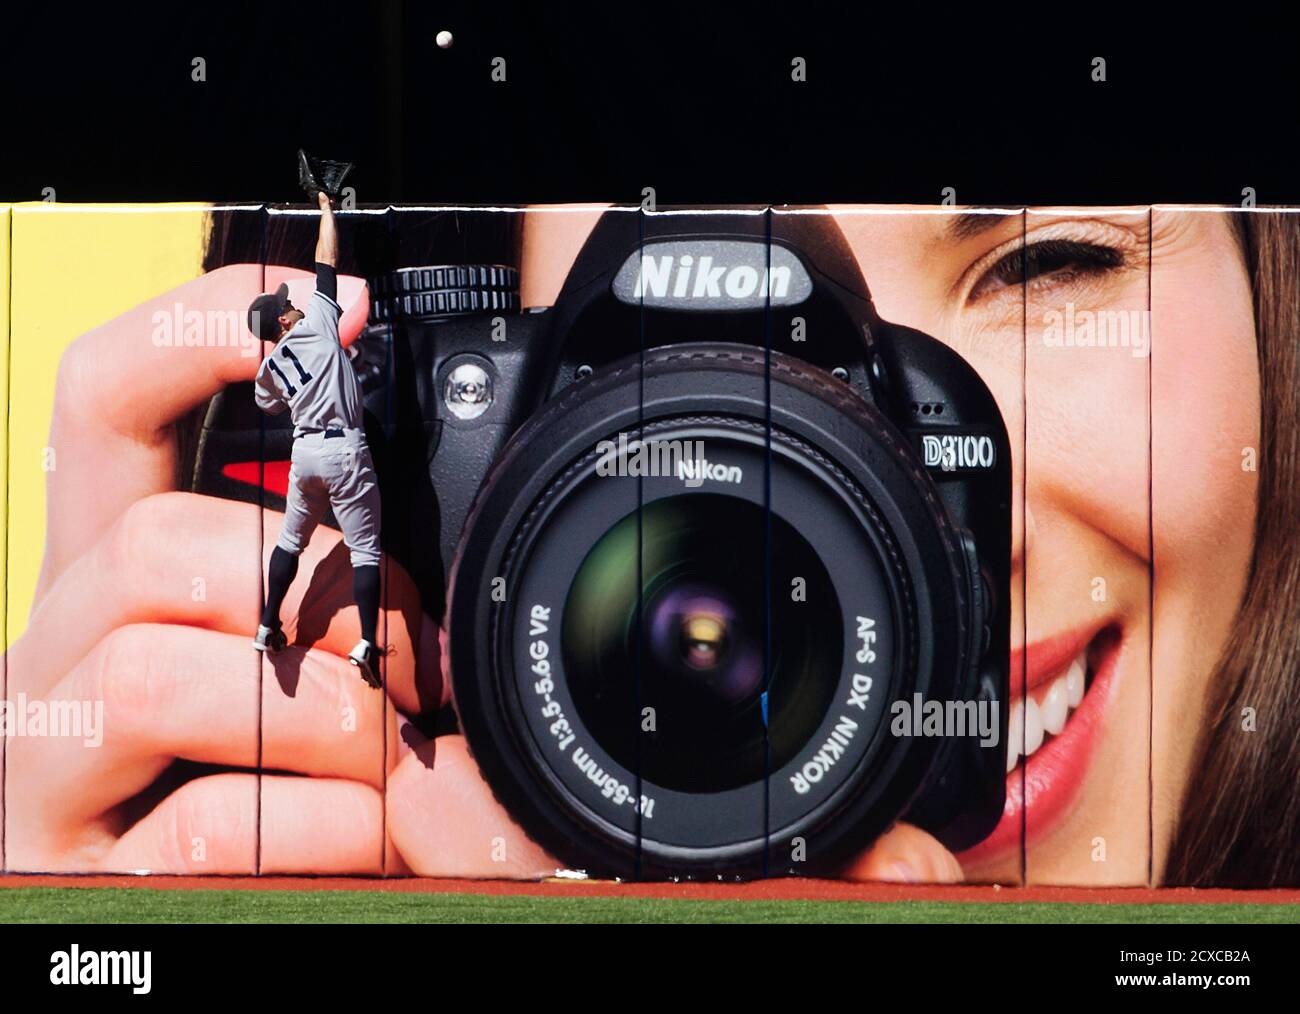 Nikon Camera Sport High Resolution Stock Photography and Images - Alamy